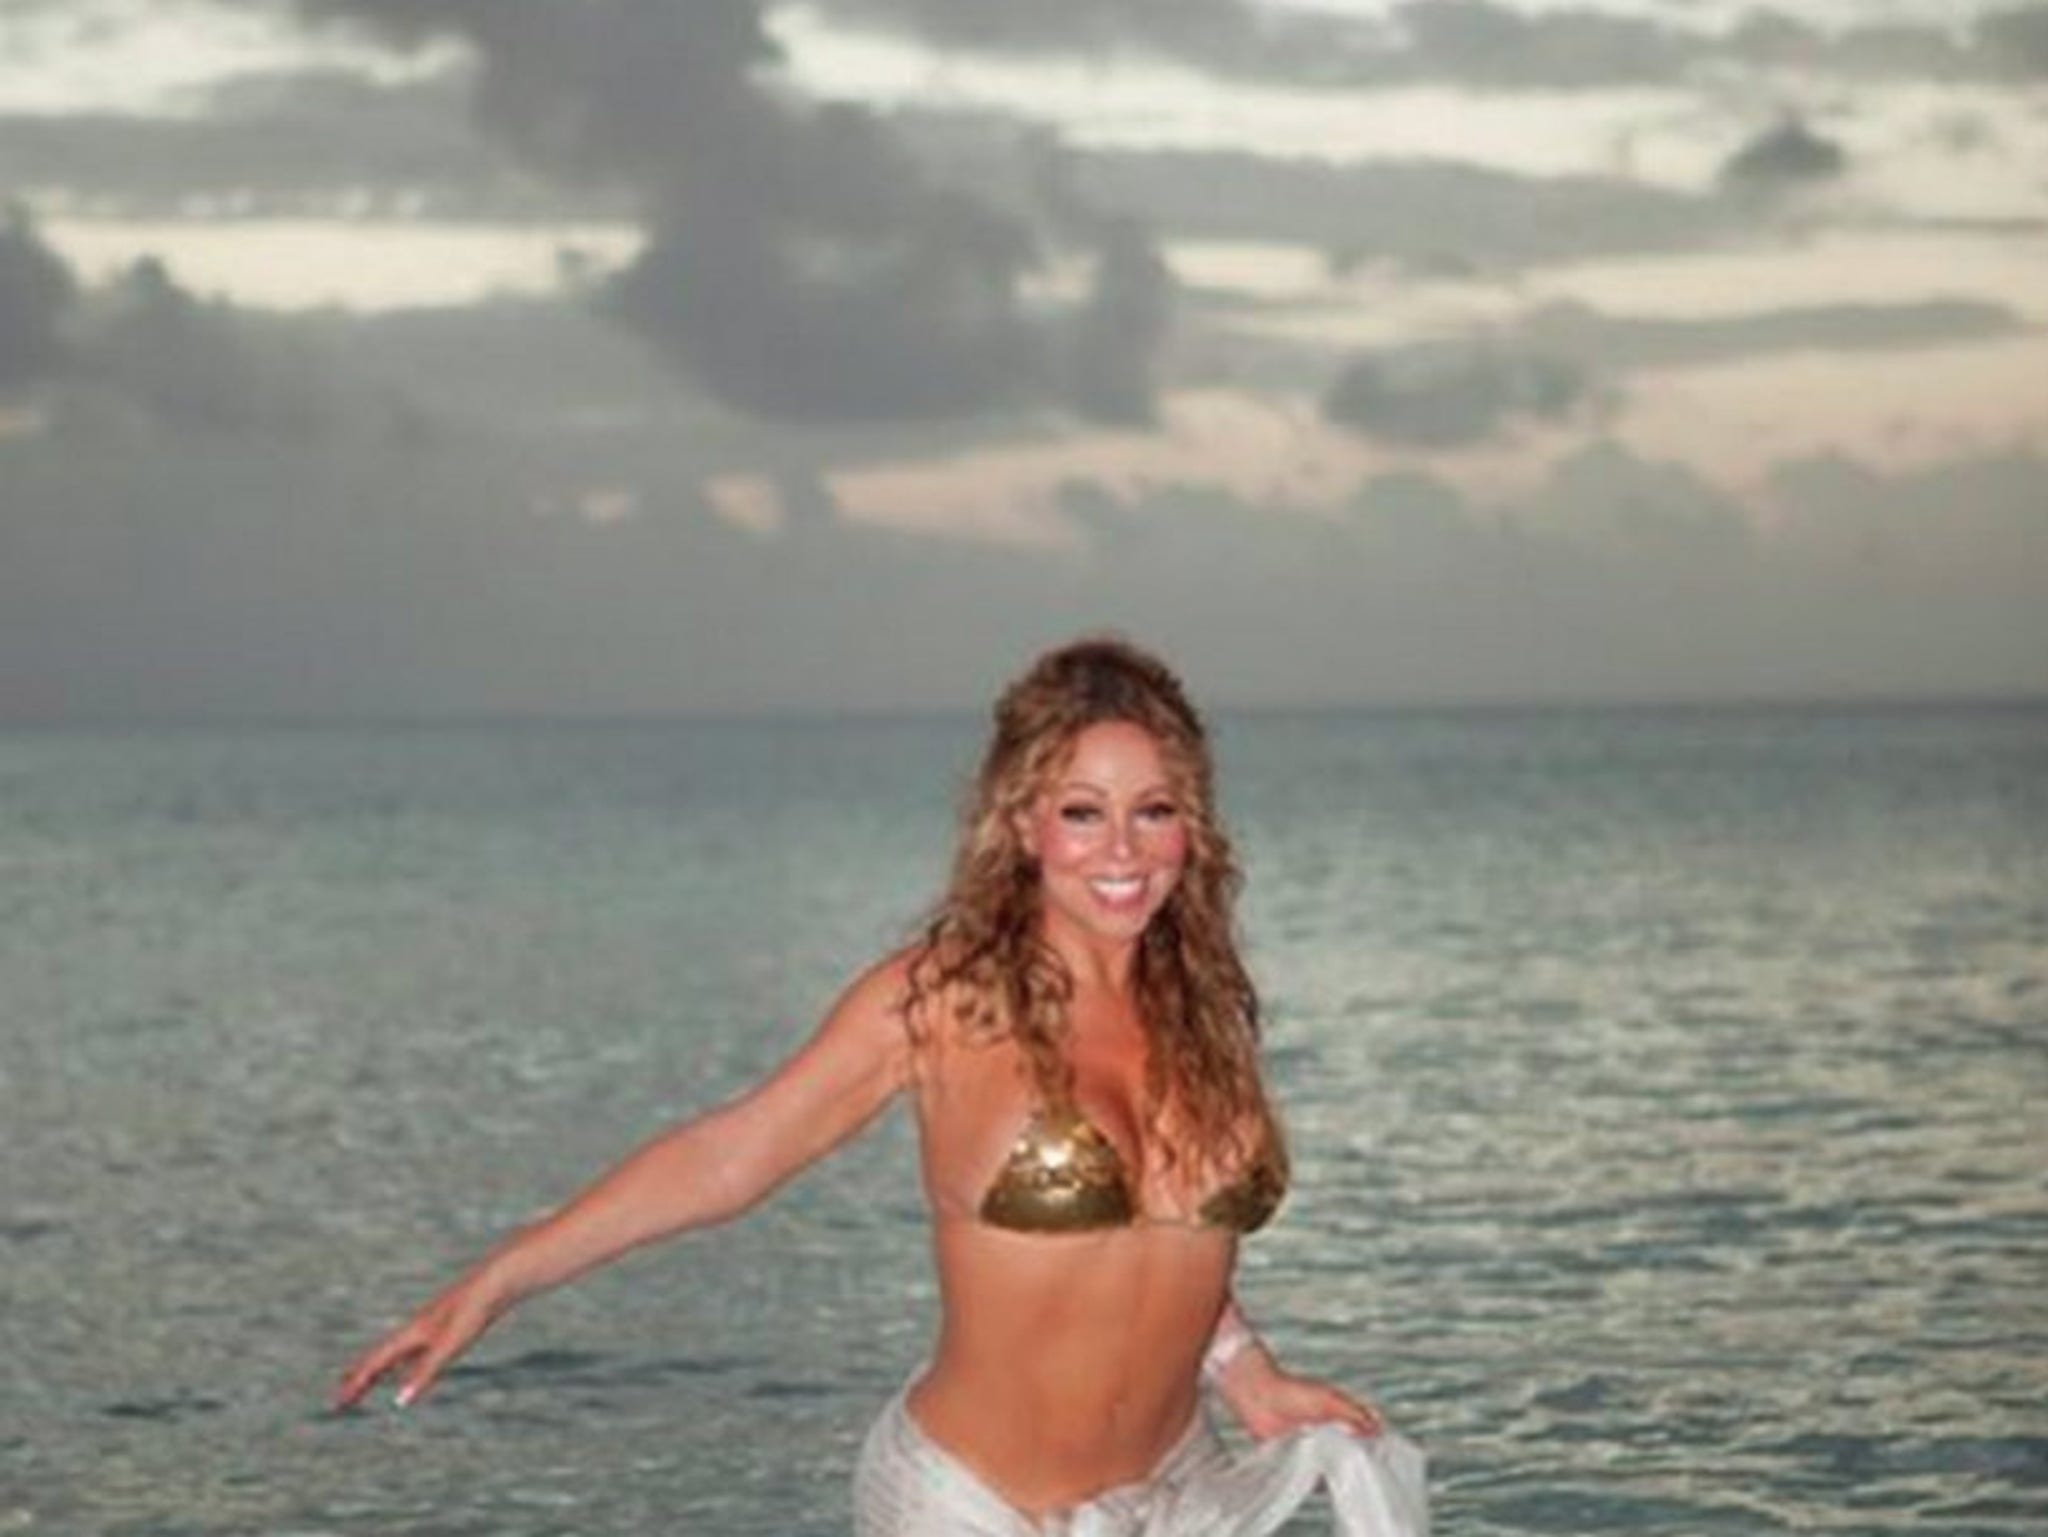 Kalksteen duif Glad Mariah Carey Stuns In Gold Bikini, Shows Tons Of Cleavage & Toned Abs!